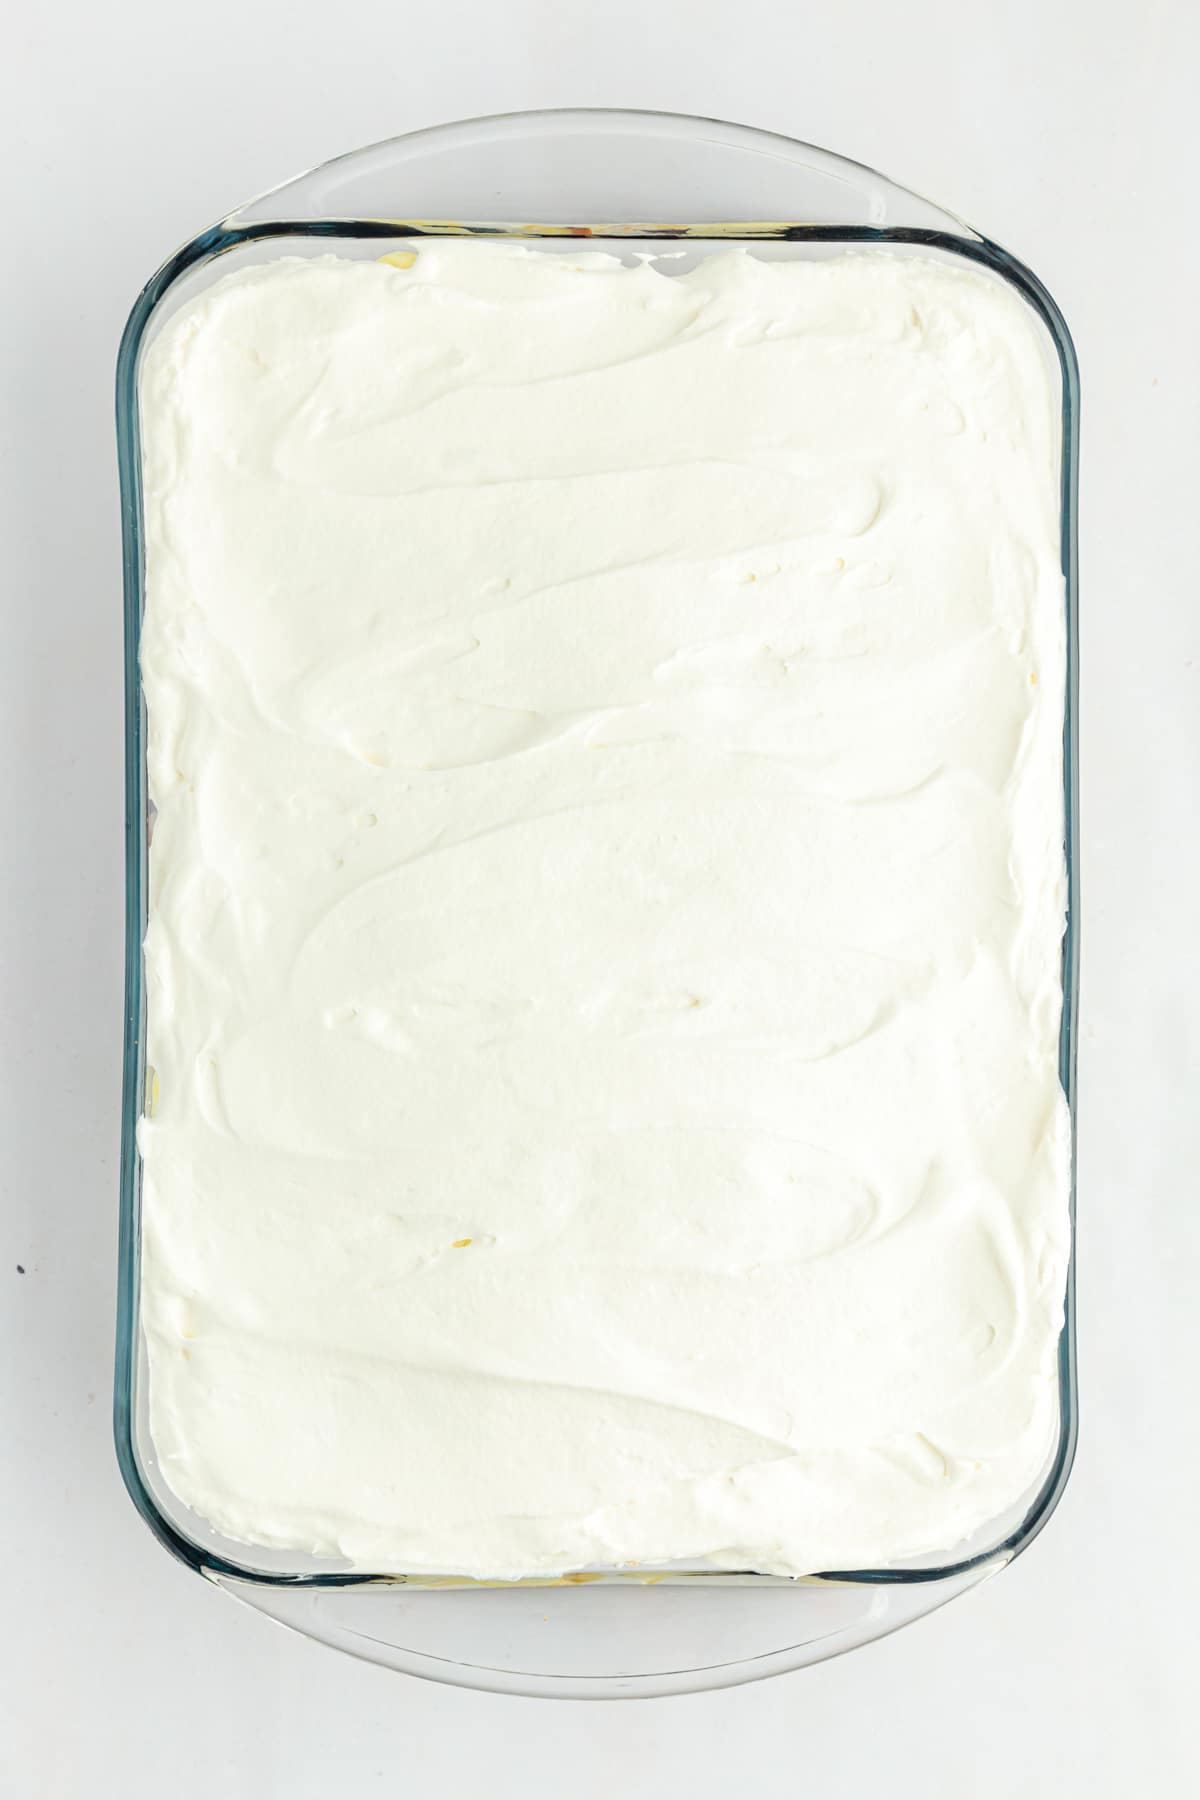 Cool Whip topping spread evenly in baking dish